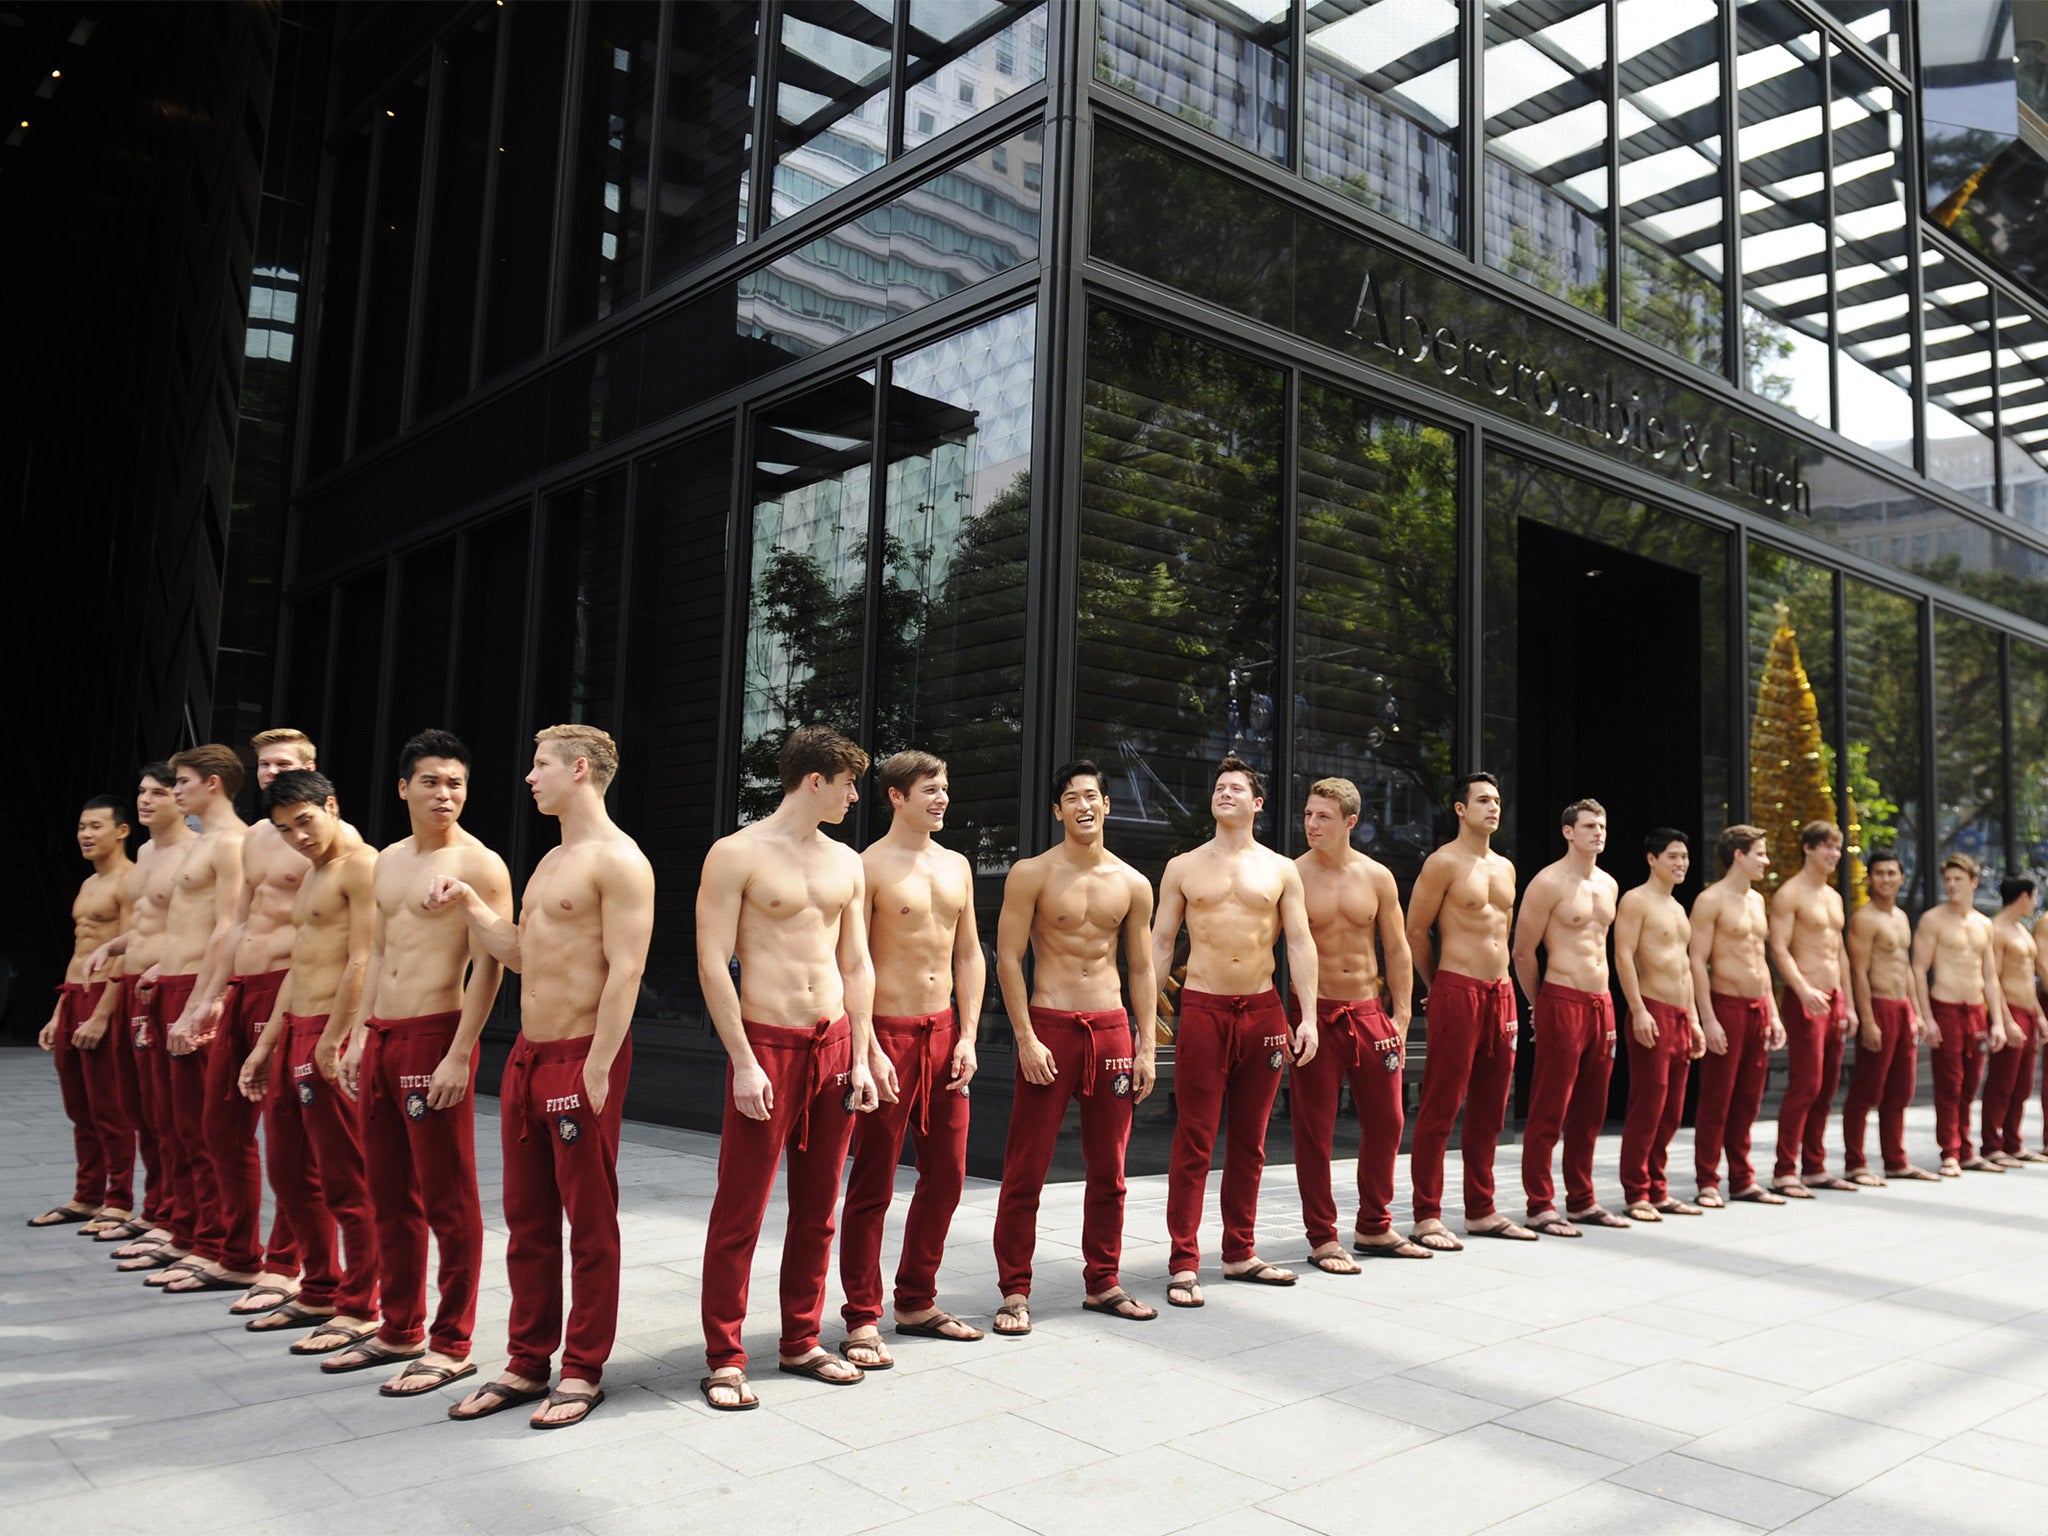 abercrombie and fitch diversity issues